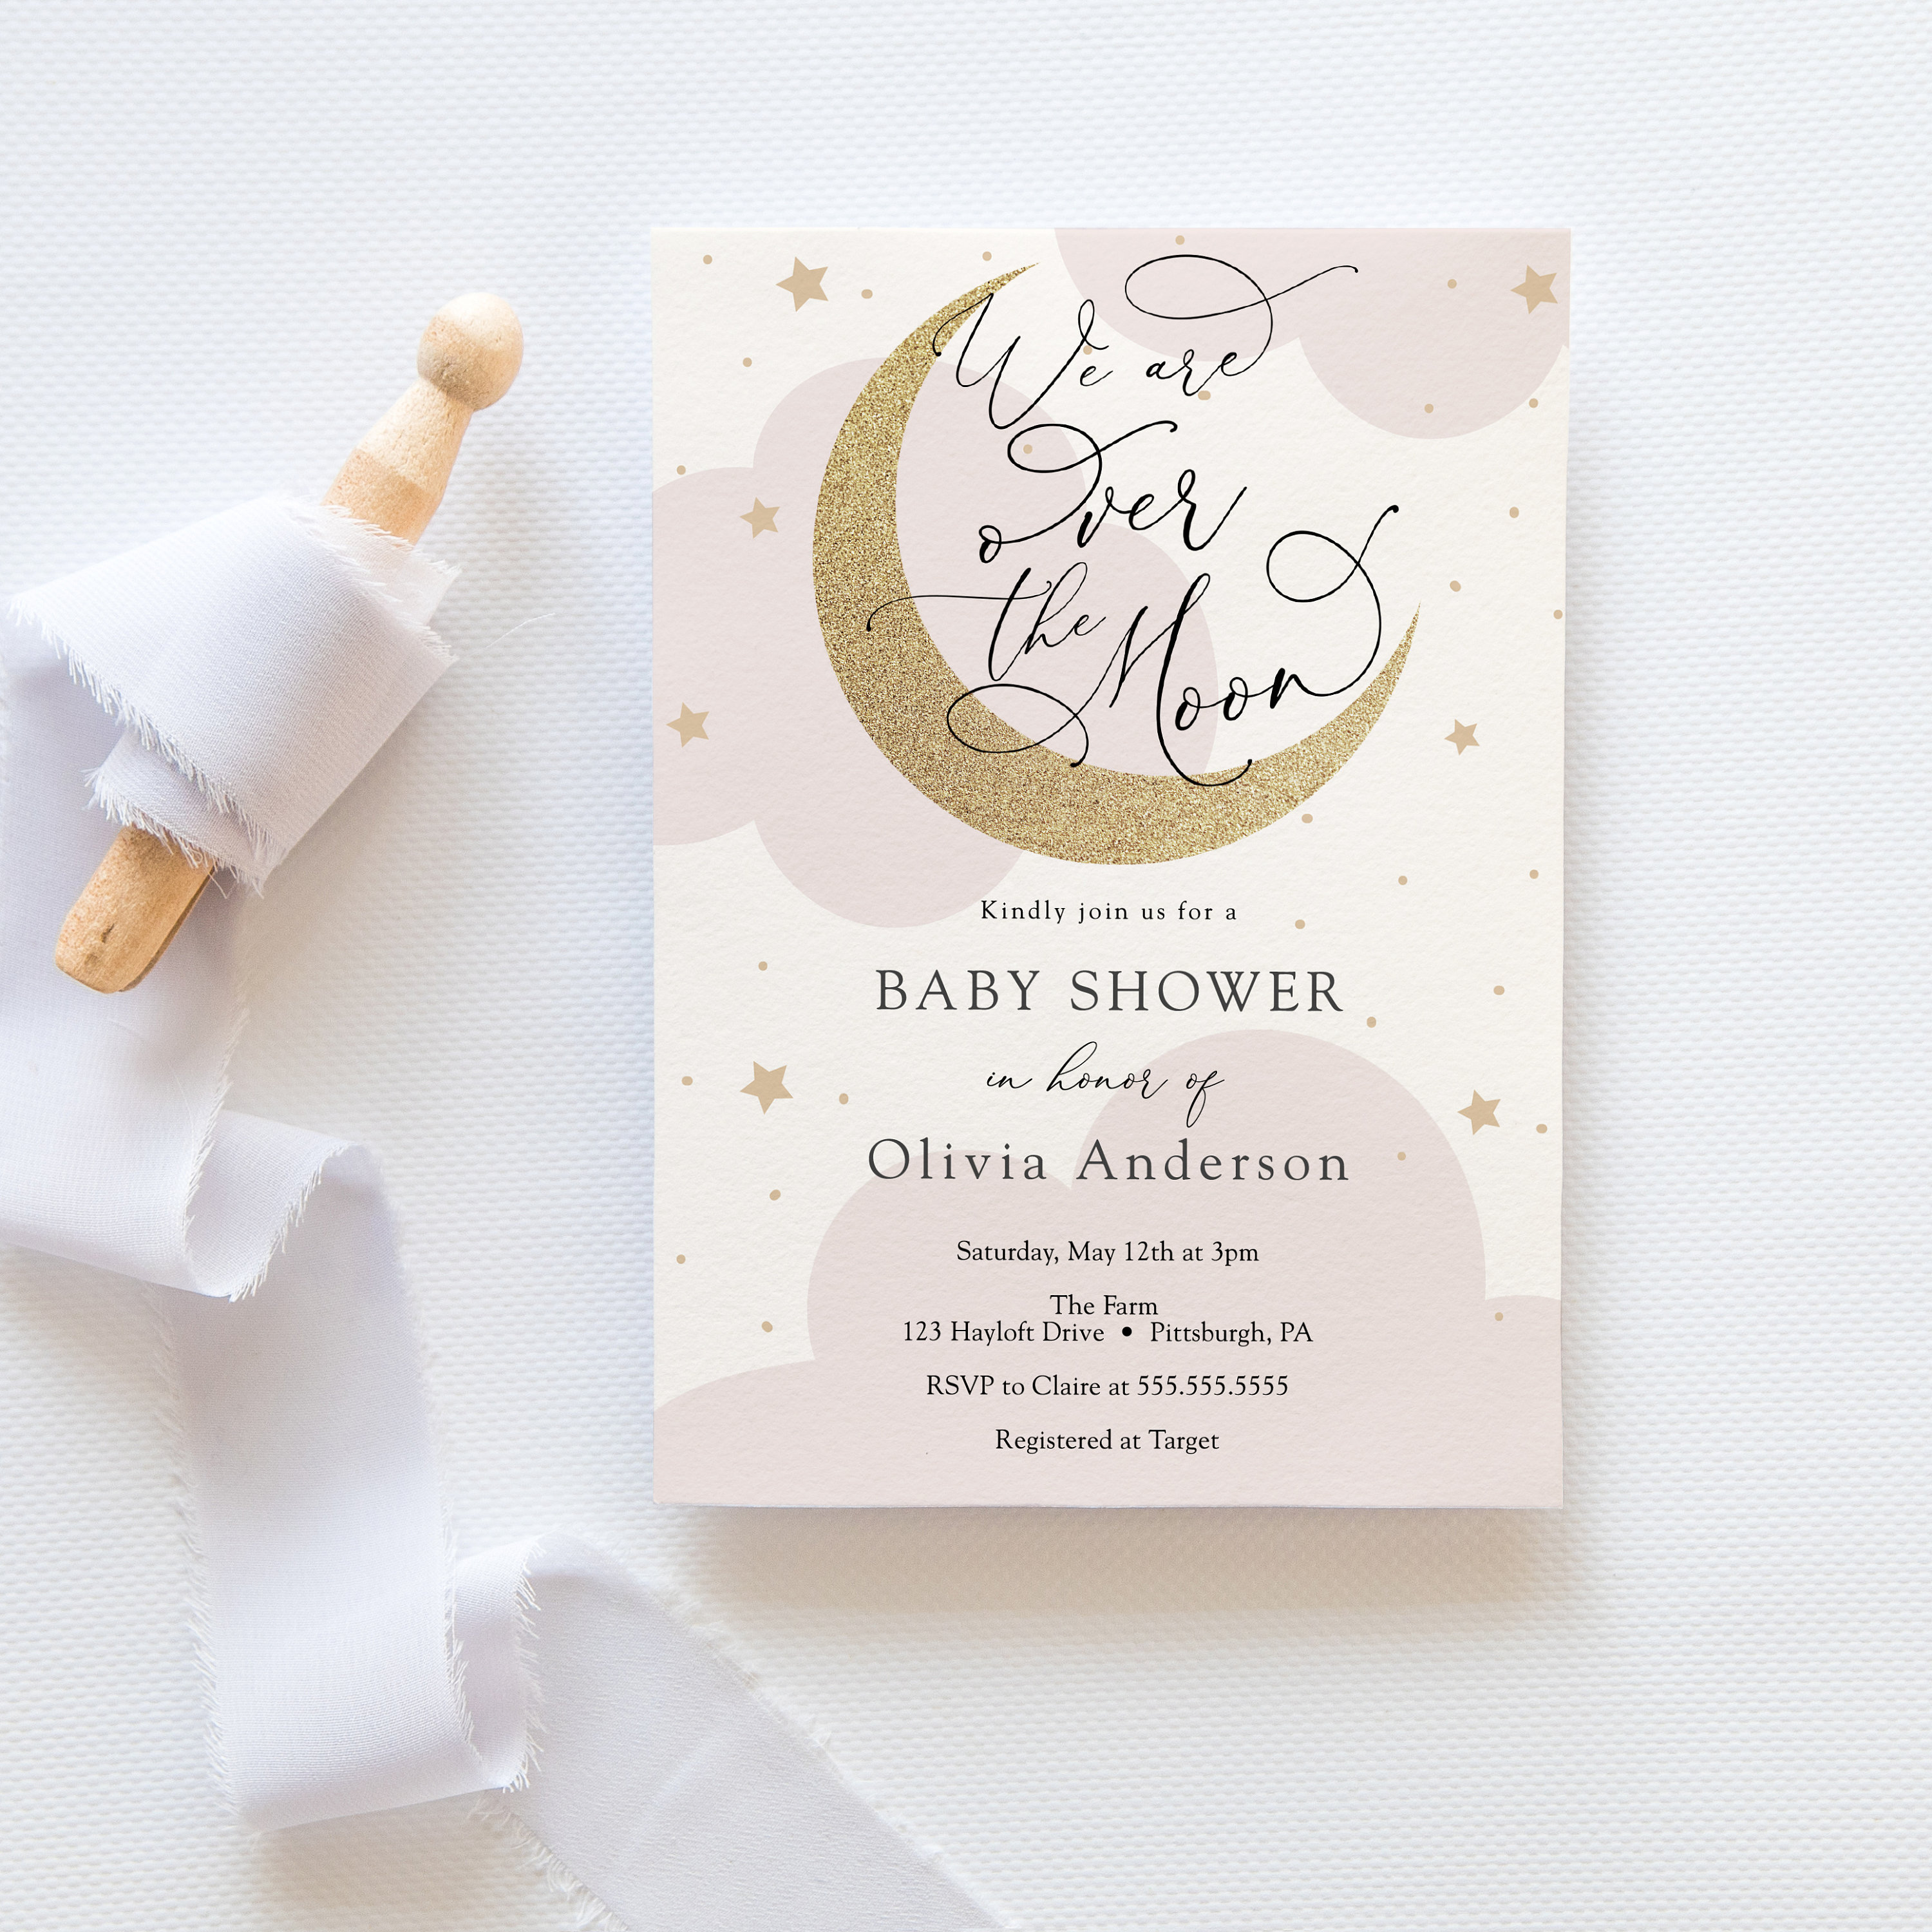 Over the Moon Twinkle Little Star Baby Shower Invitation Stars and Moon